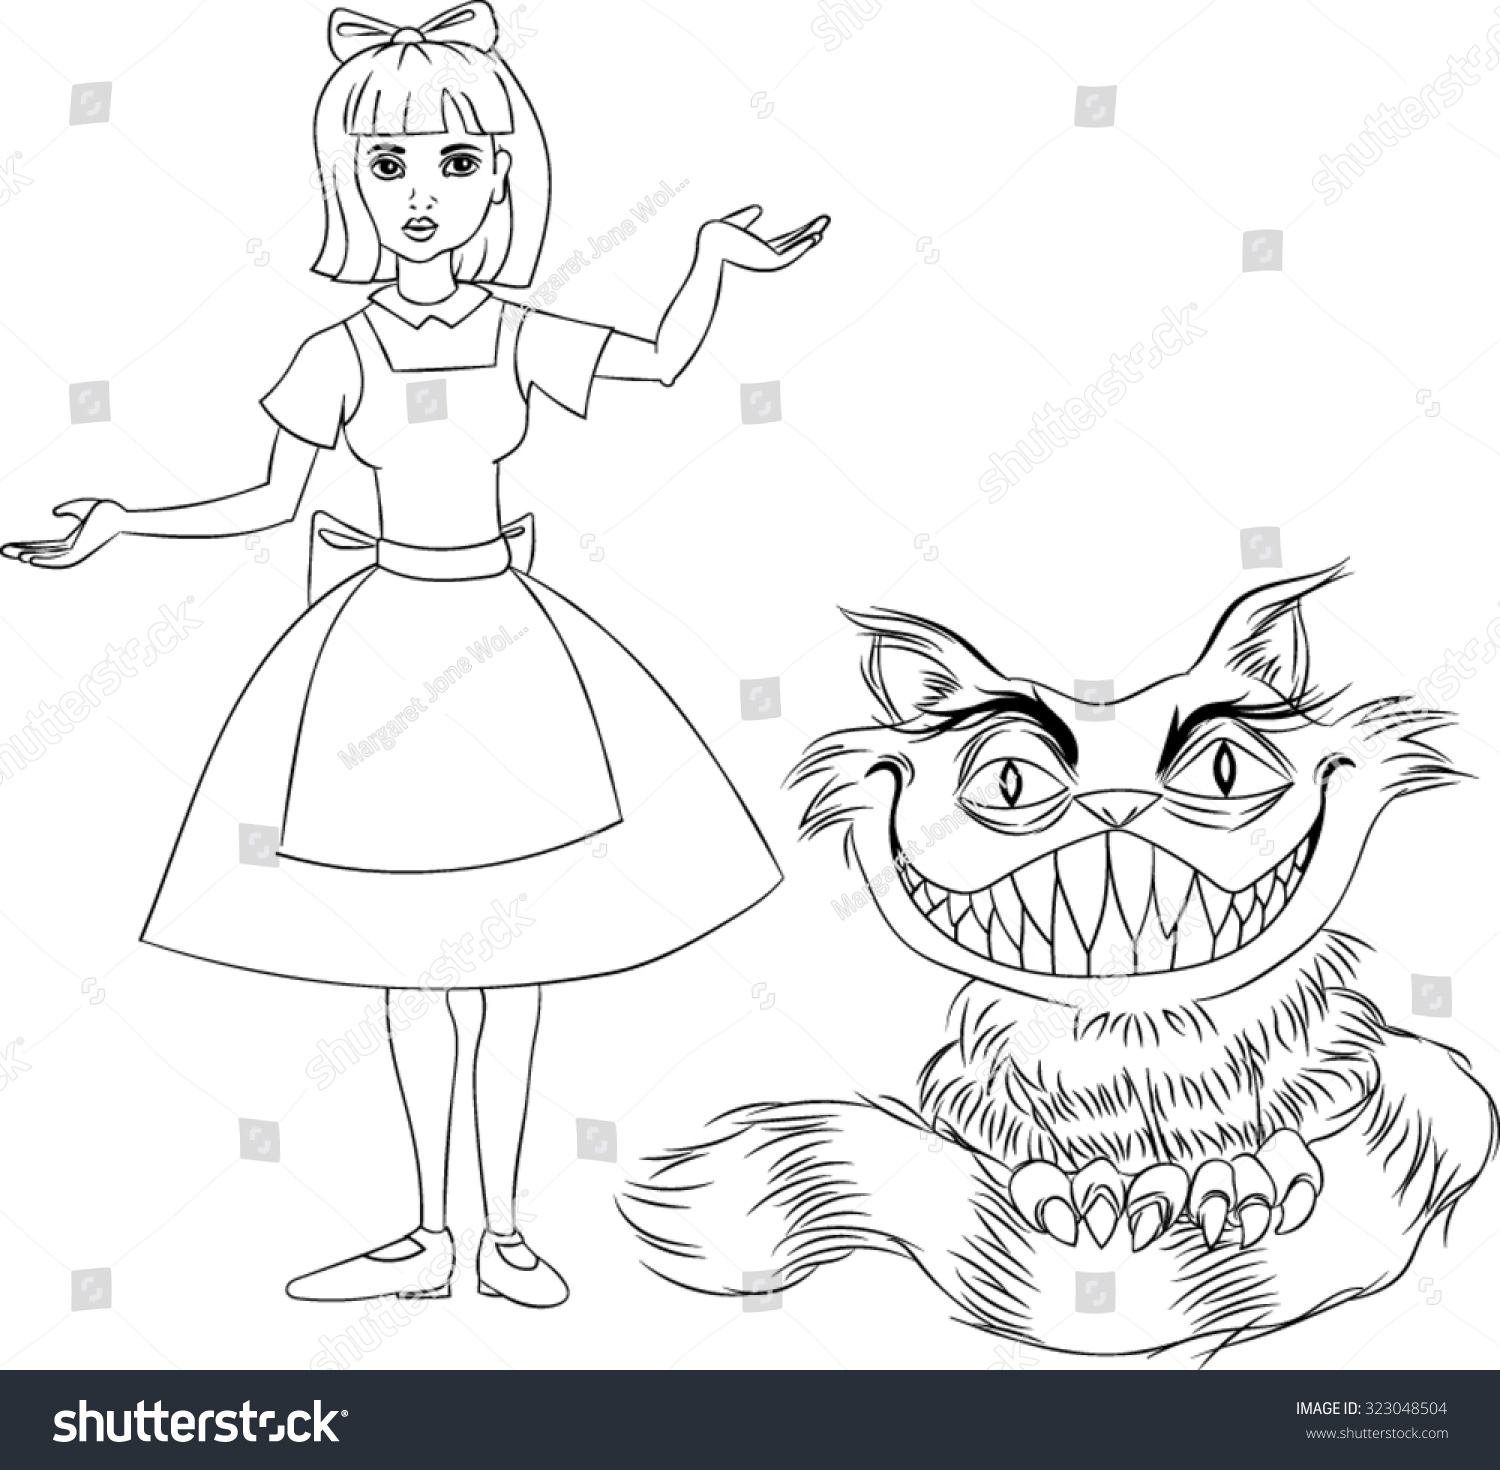 SVG of Alice & Cheshire Cat - Vector Illustration svg